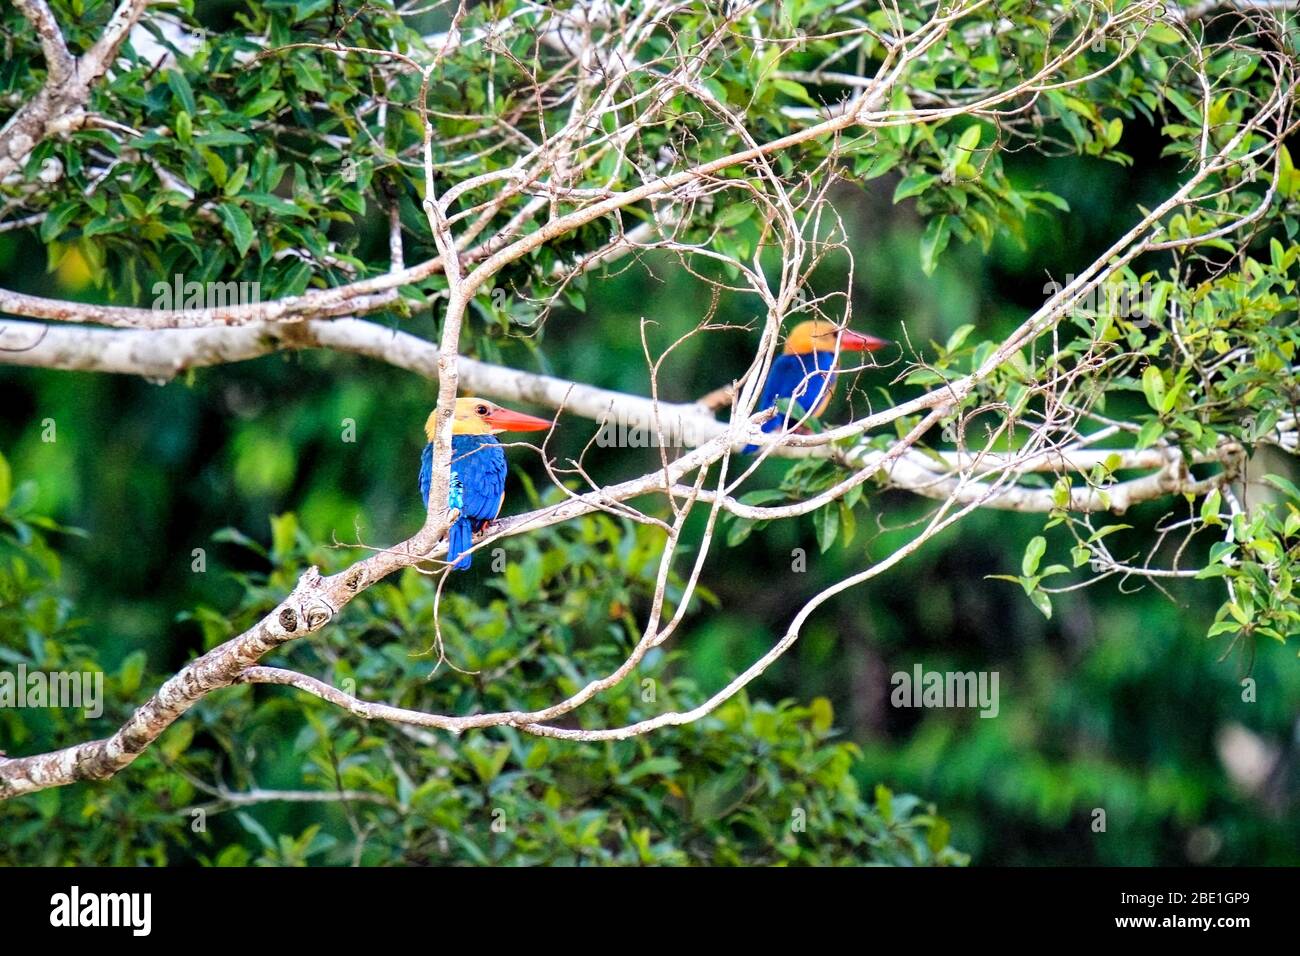 Two Stork-billed kingfishers standing on a branch in near Kinabatangan River, Borneo, Sabah, Malaysia Stock Photo